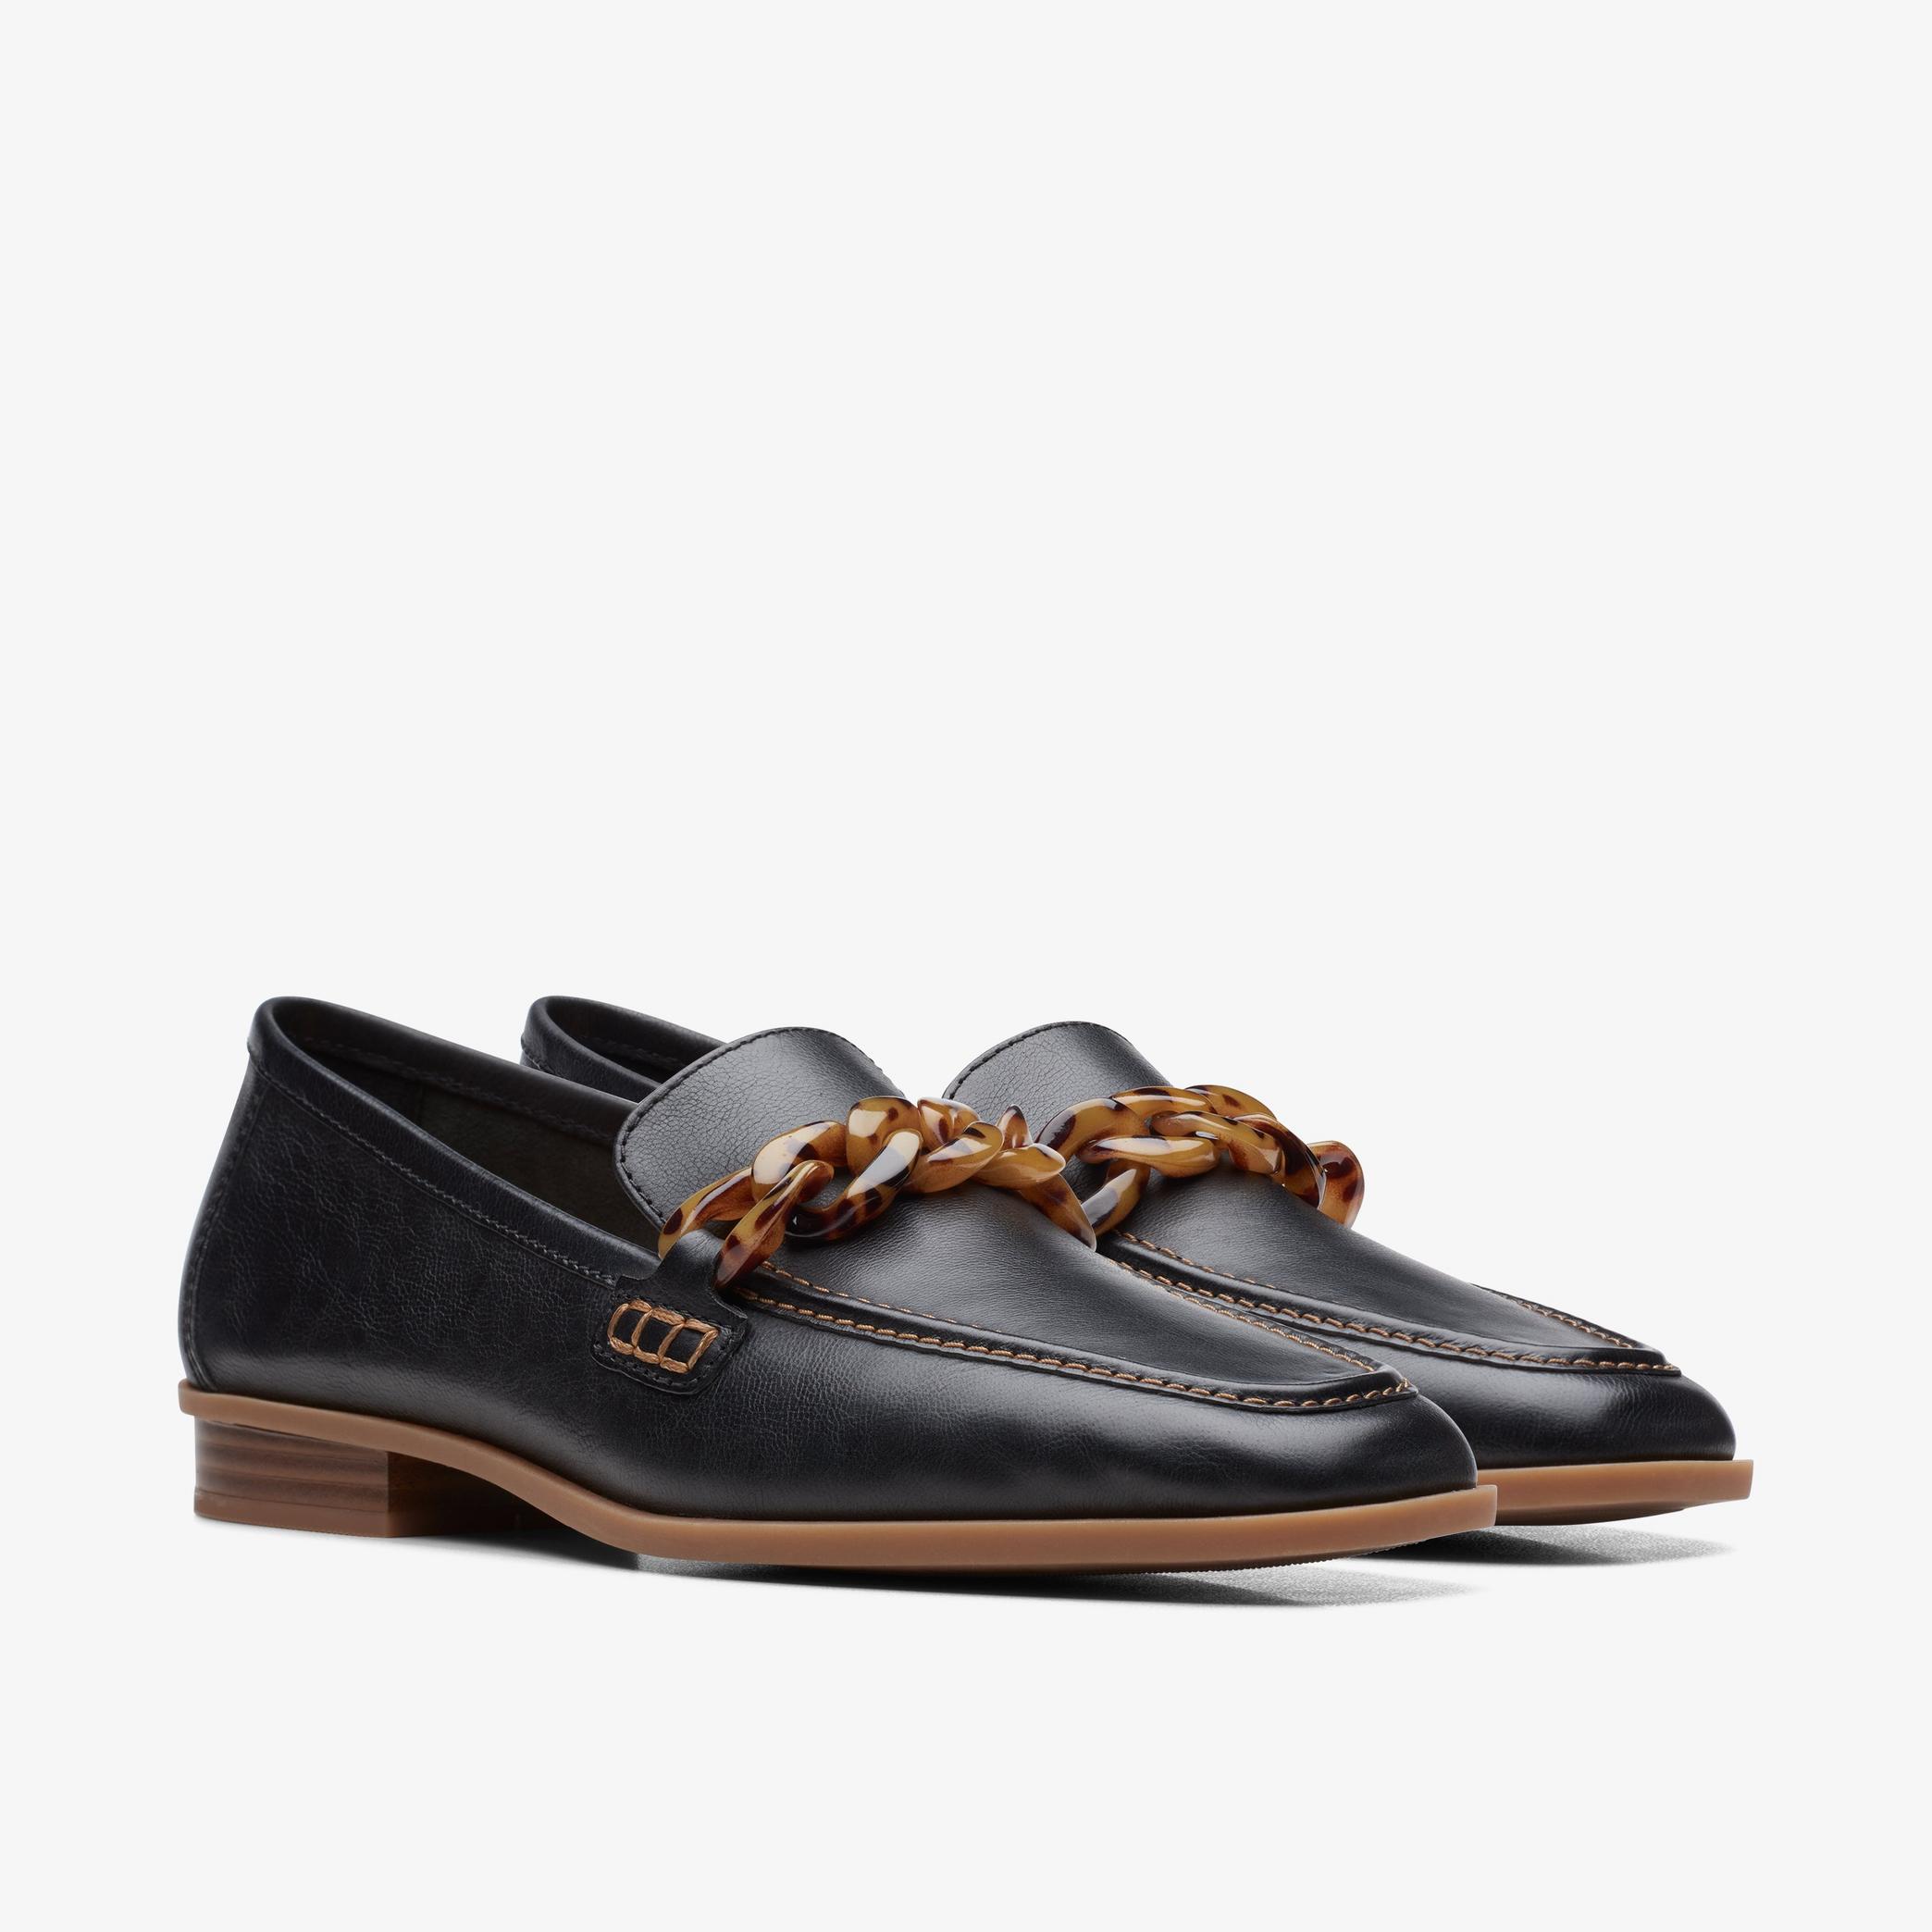 Sarafyna Iris Black Leather Loafers, view 4 of 9